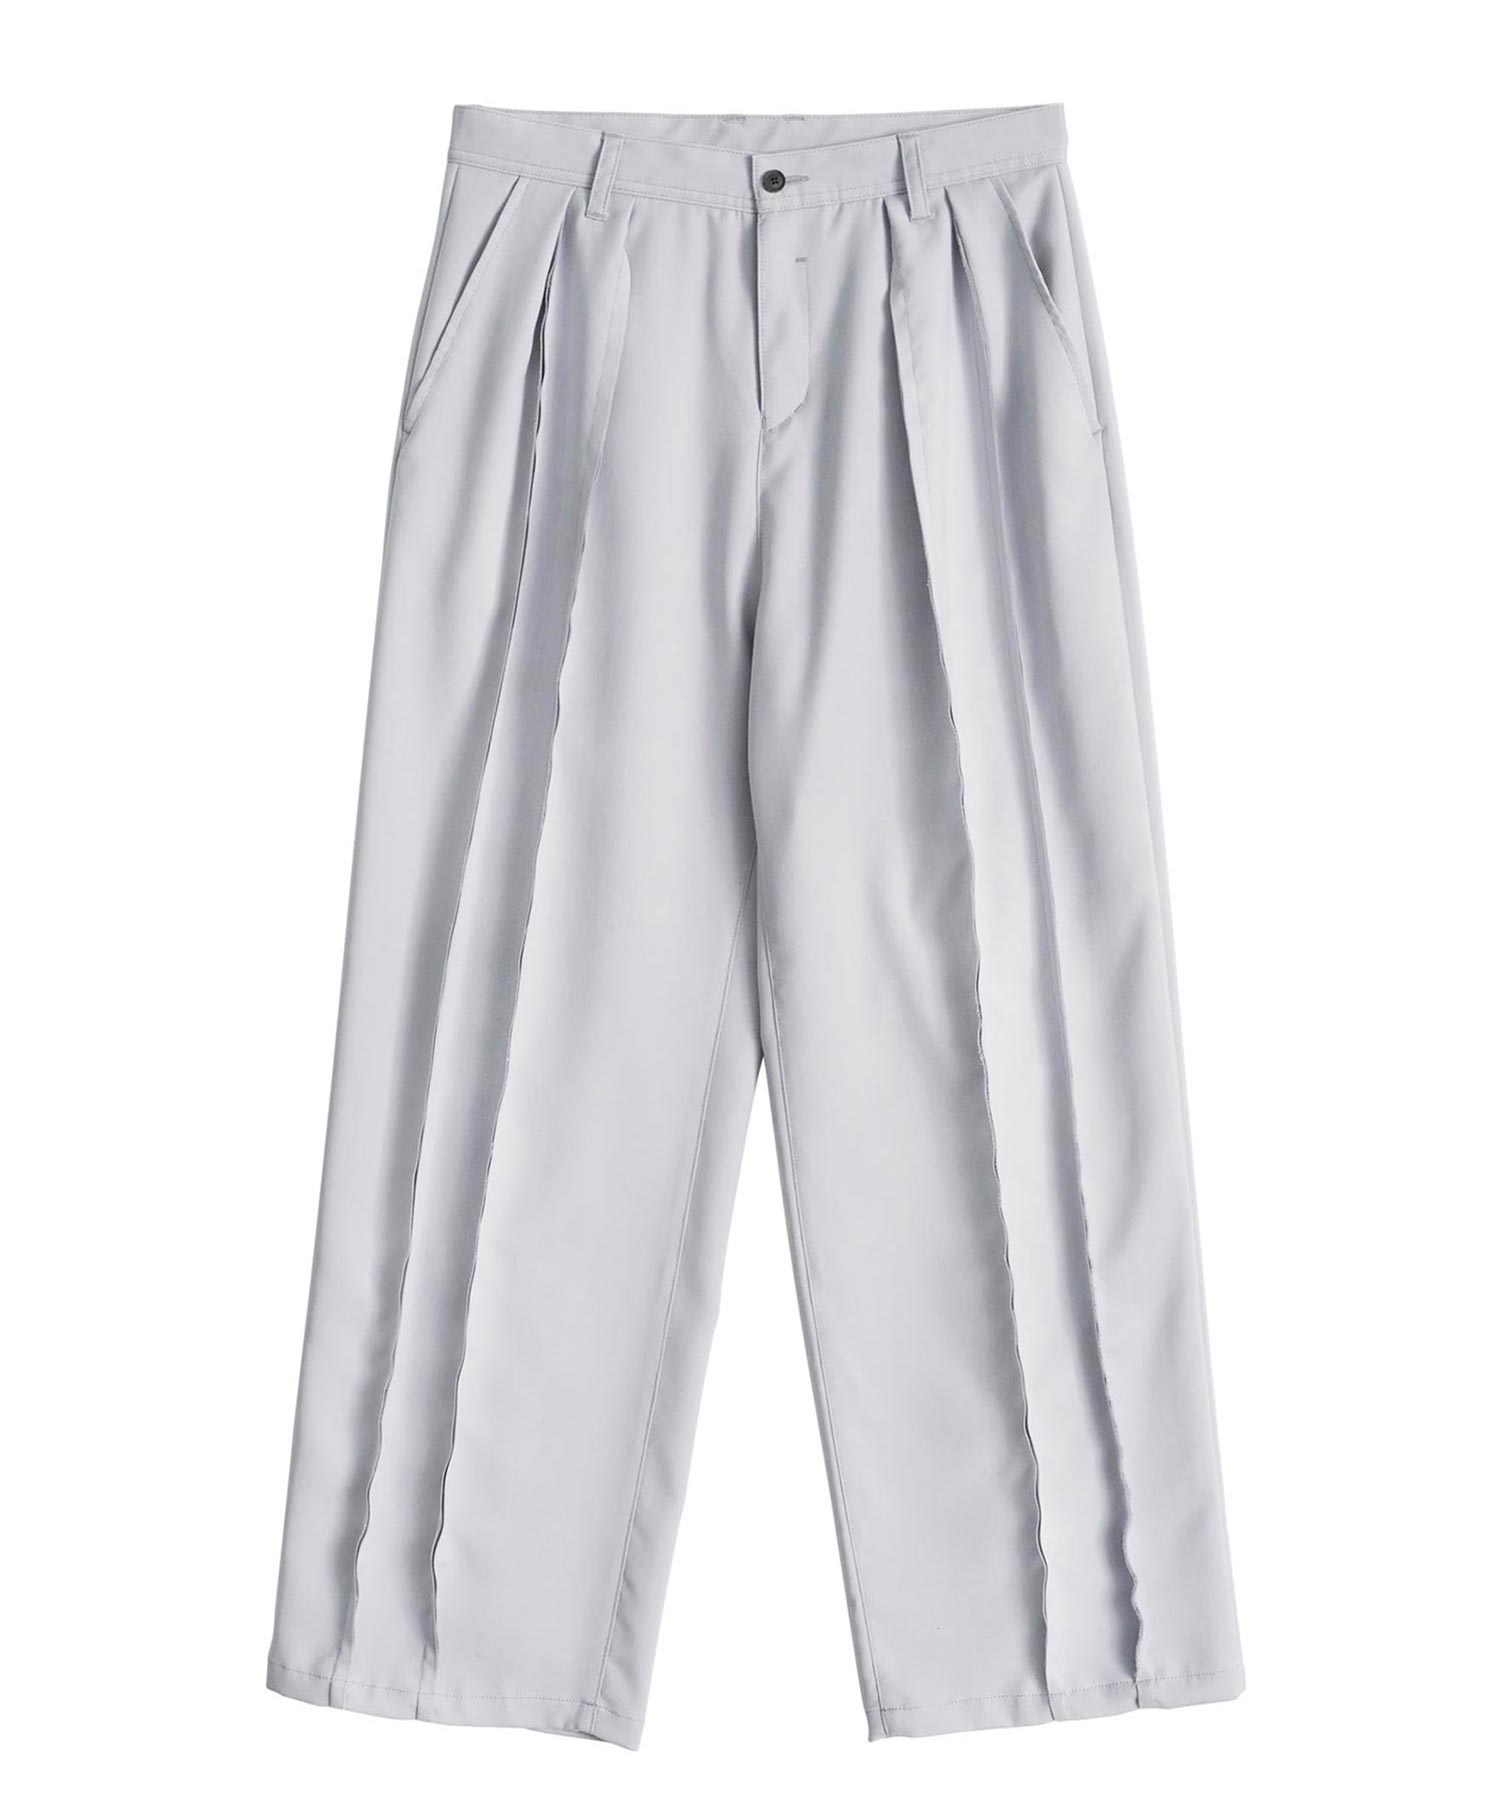 SHAREEF ONLINE SHOP / DOUBLE CLOTH WIDE PANTS